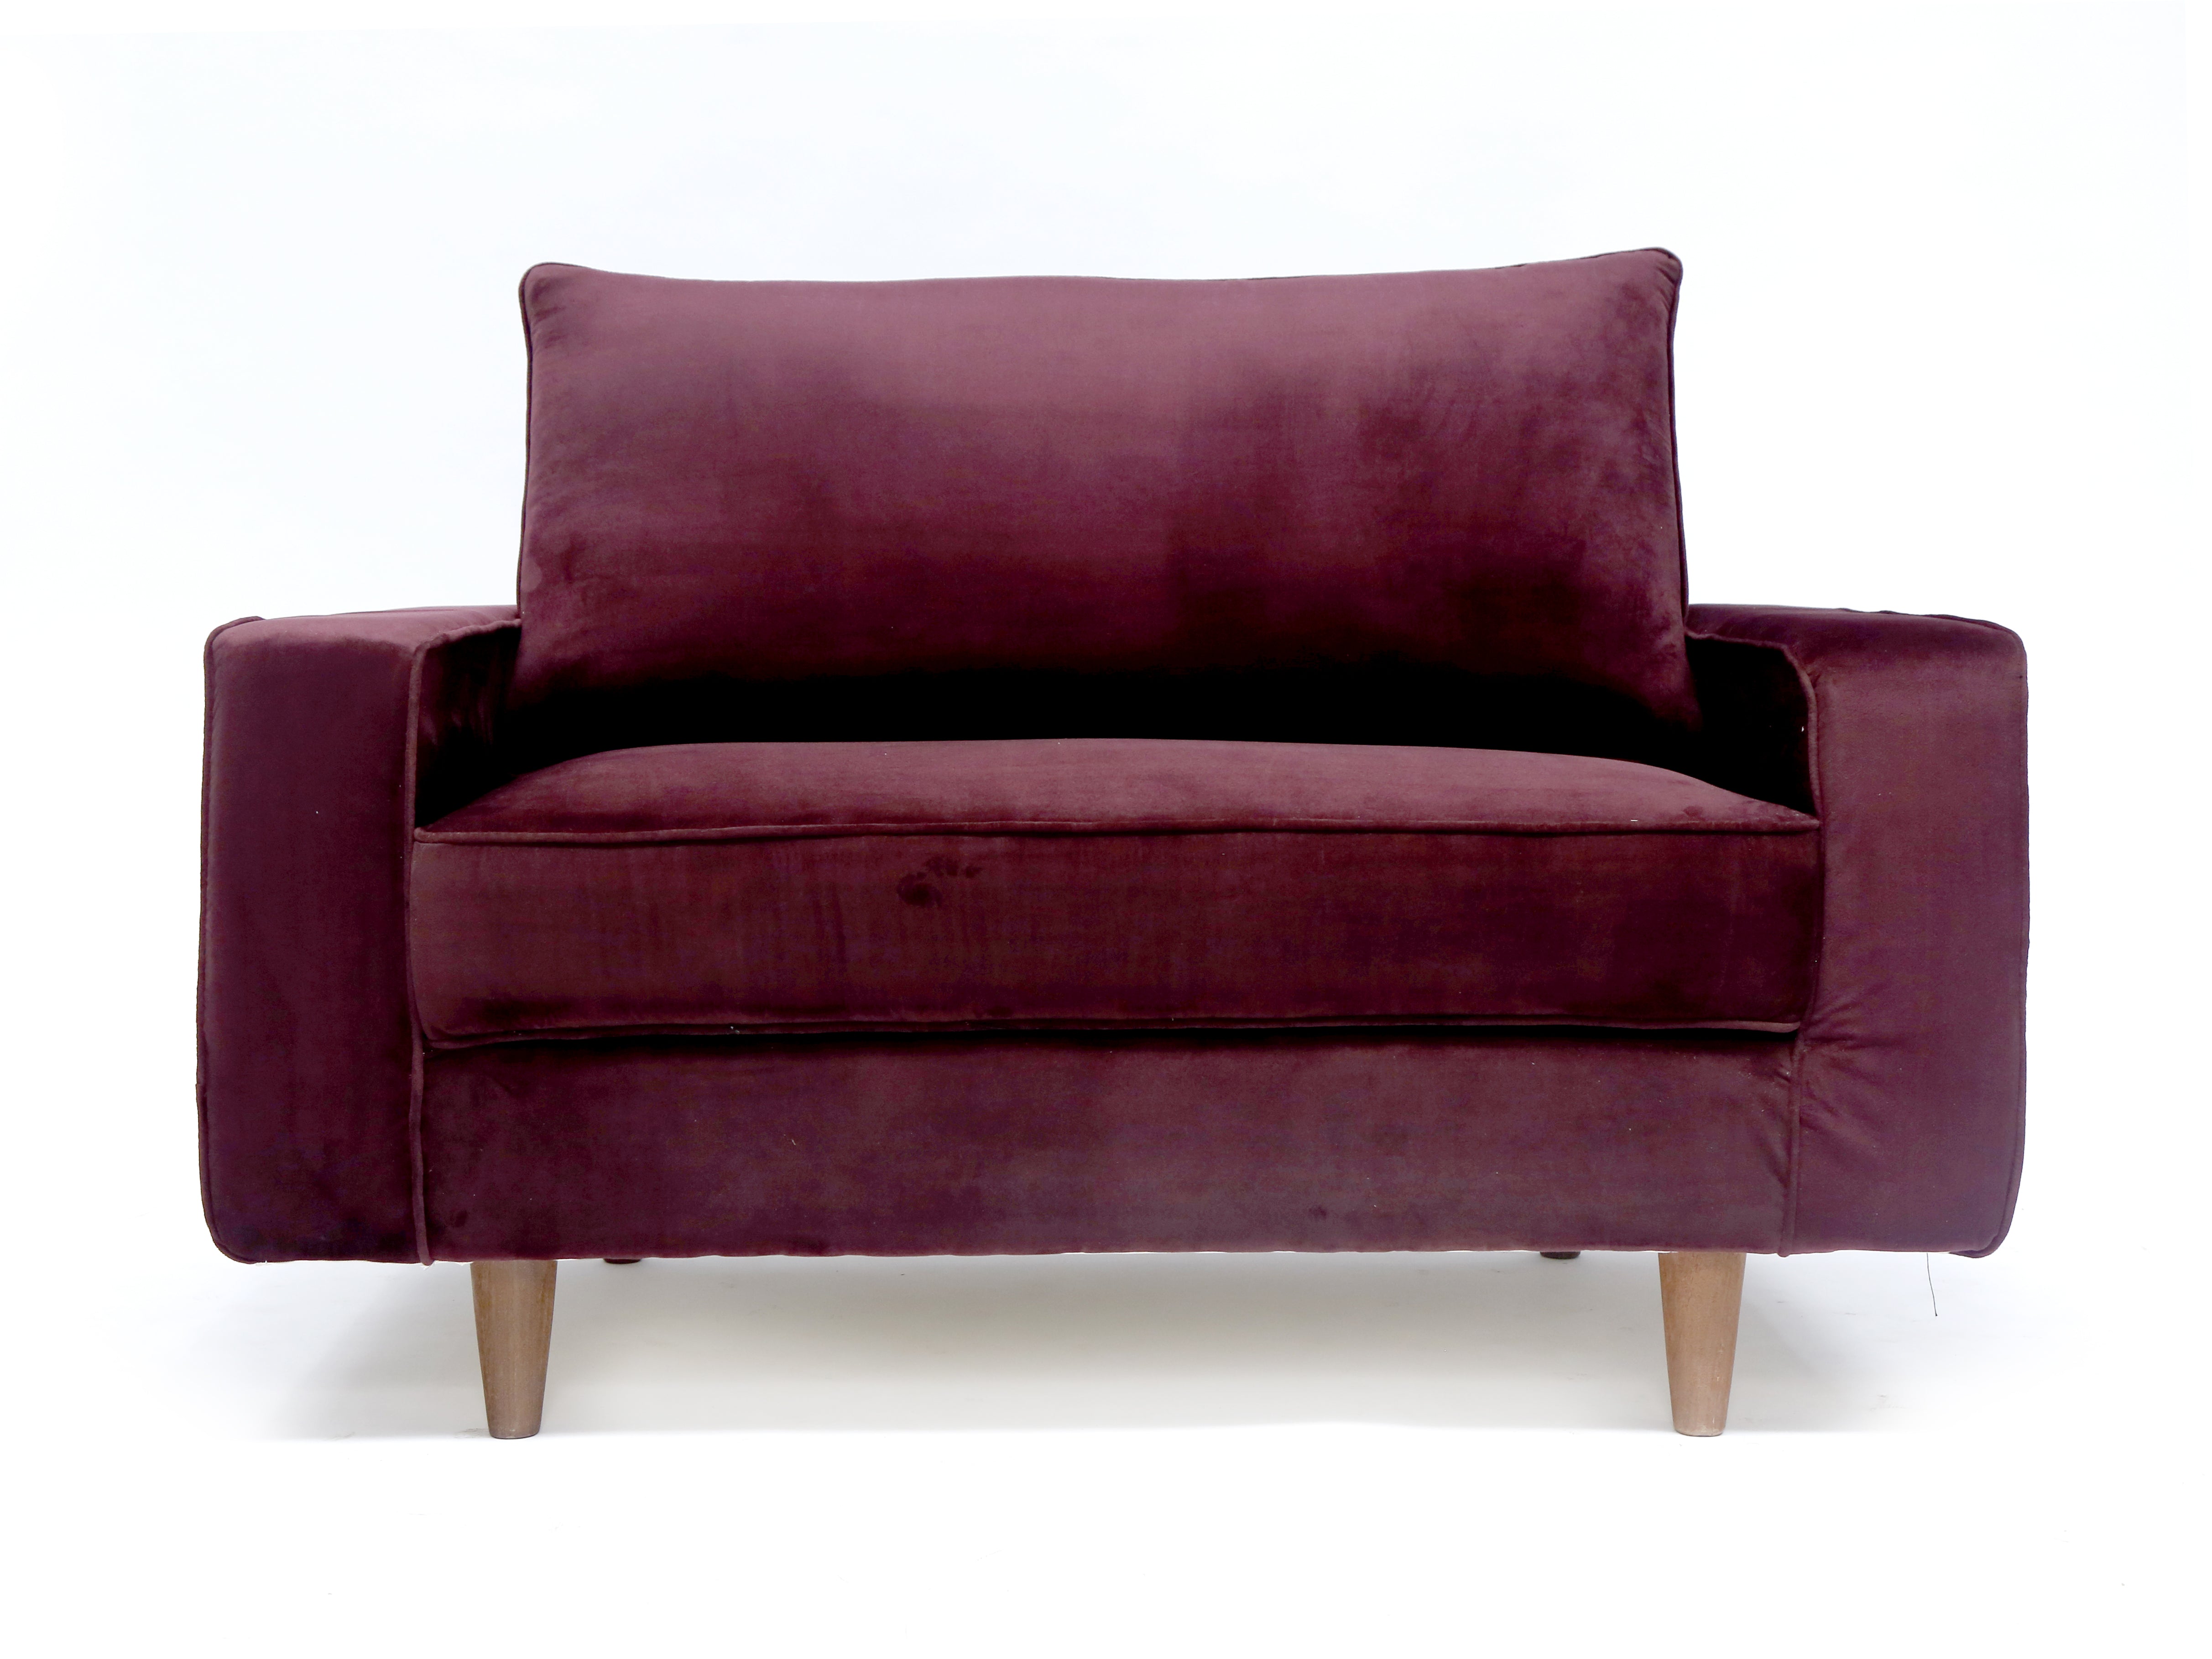 Upholstered Red Pinch Sofa Sofa